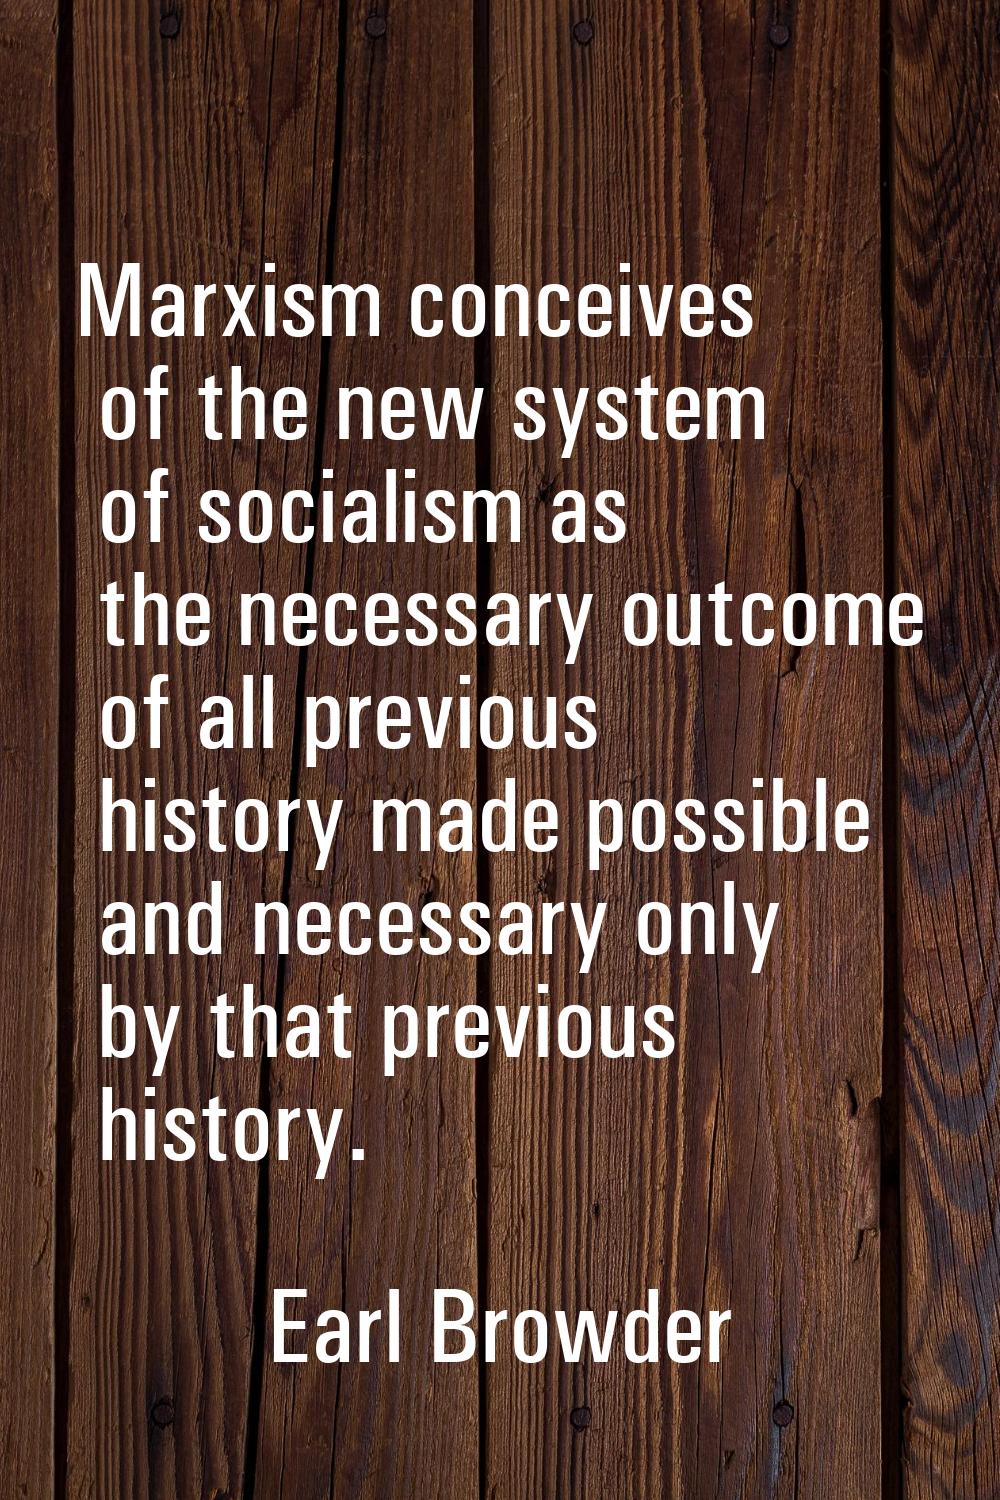 Marxism conceives of the new system of socialism as the necessary outcome of all previous history m